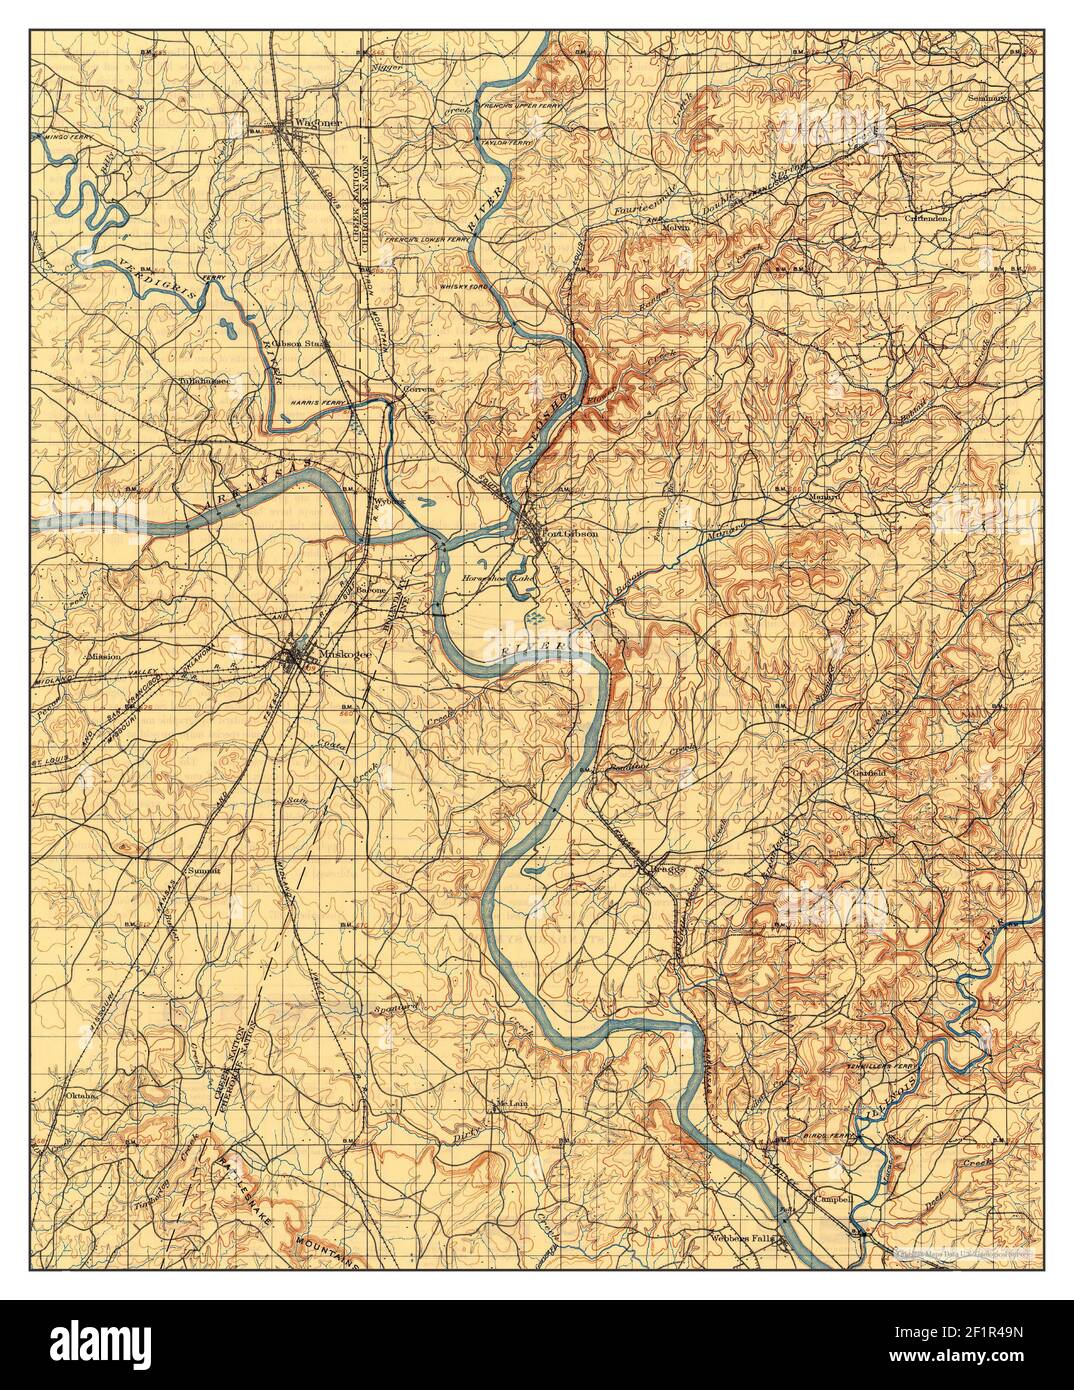 Muskogee, Oklahoma, map 1901, 1:125000, United States of America by Timeless Maps, data U.S. Geological Survey Foto Stock